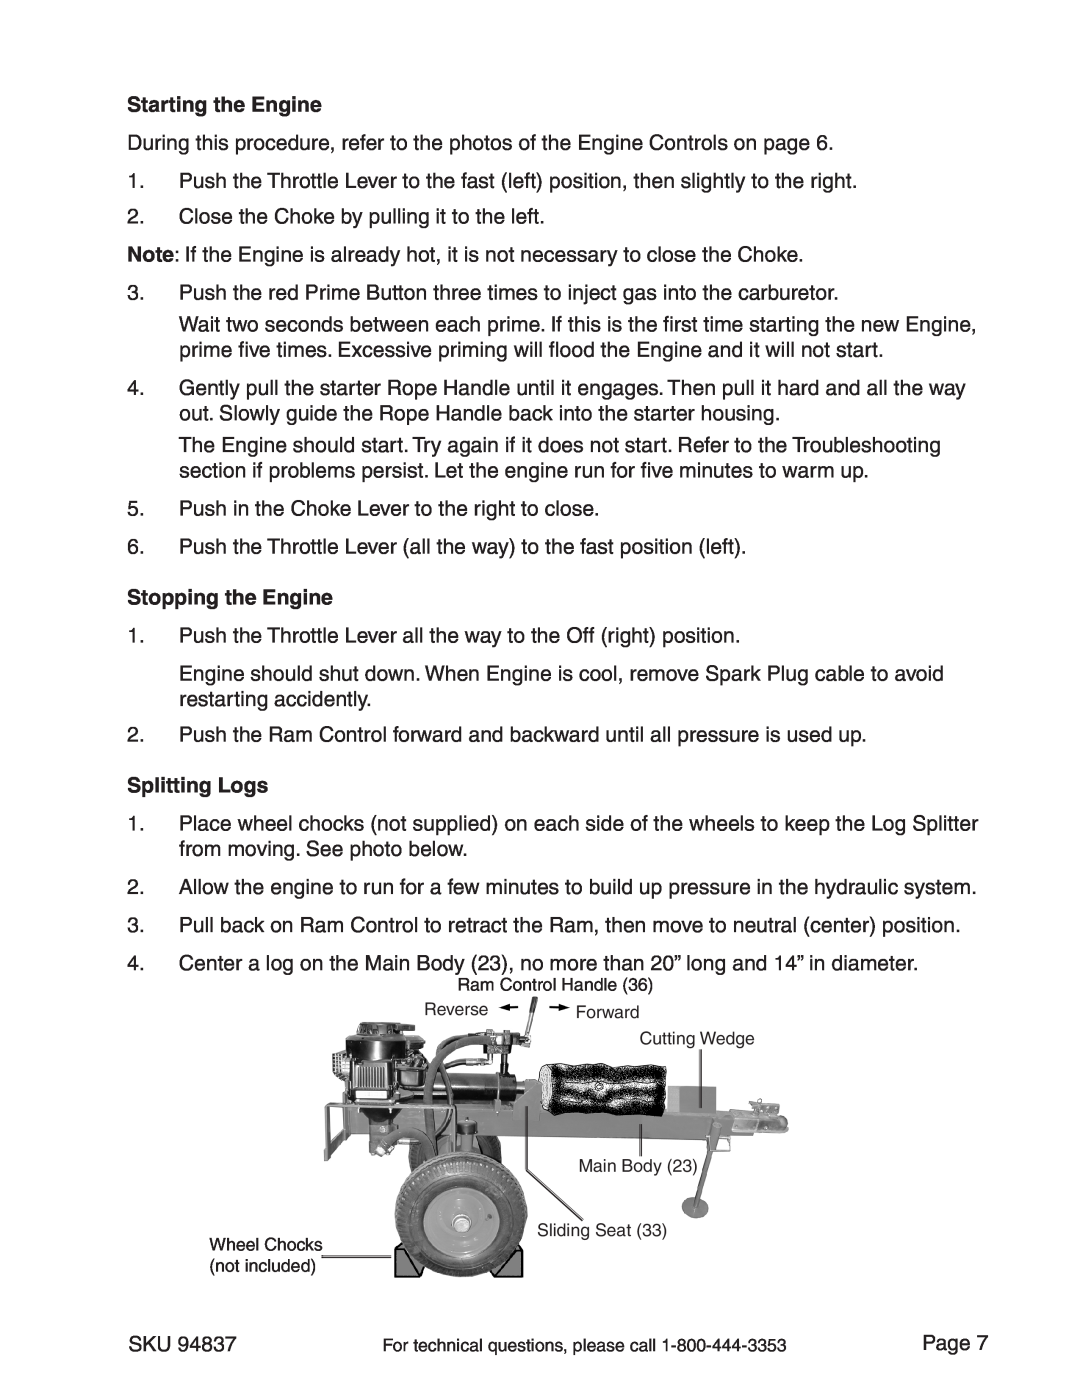 Harbor Freight Tools 94837 manual Starting the Engine, Stopping the Engine, Splitting Logs 